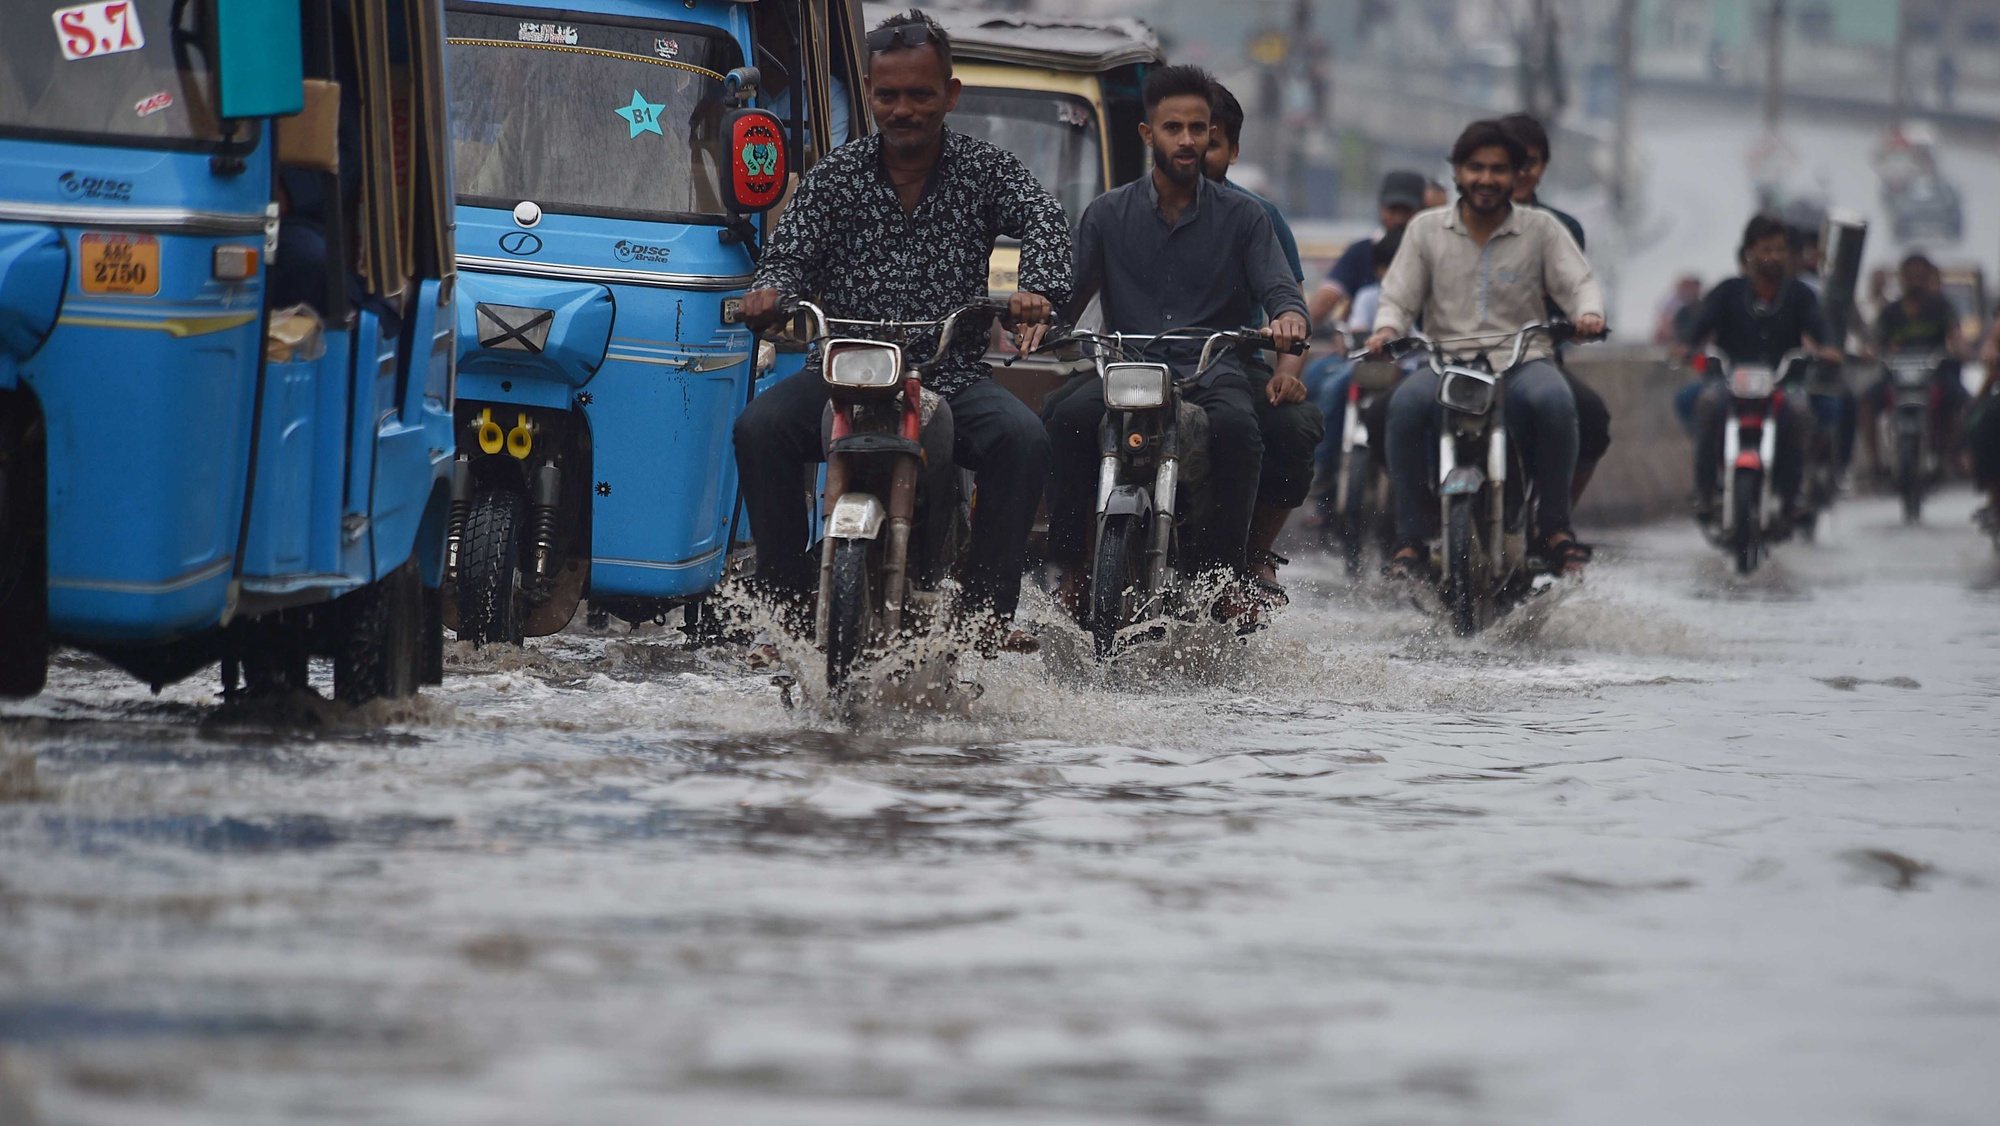 epa11278190 People ride motorcycles during heavy rain in Karachi, Pakistan, 14 April 2024. At least 29 people have died and another seven have been injured in the last two days due to lightning strikes and incidents related to the heavy rains affecting several provinces of Pakistan, rescue officials said. In total, 17 people died in the northeastern province of Punjab, in addition to eight deaths in southern Balochistan and four in northern Khyber Pakhtunkhwa.  EPA/SHAHZAIB AKBER